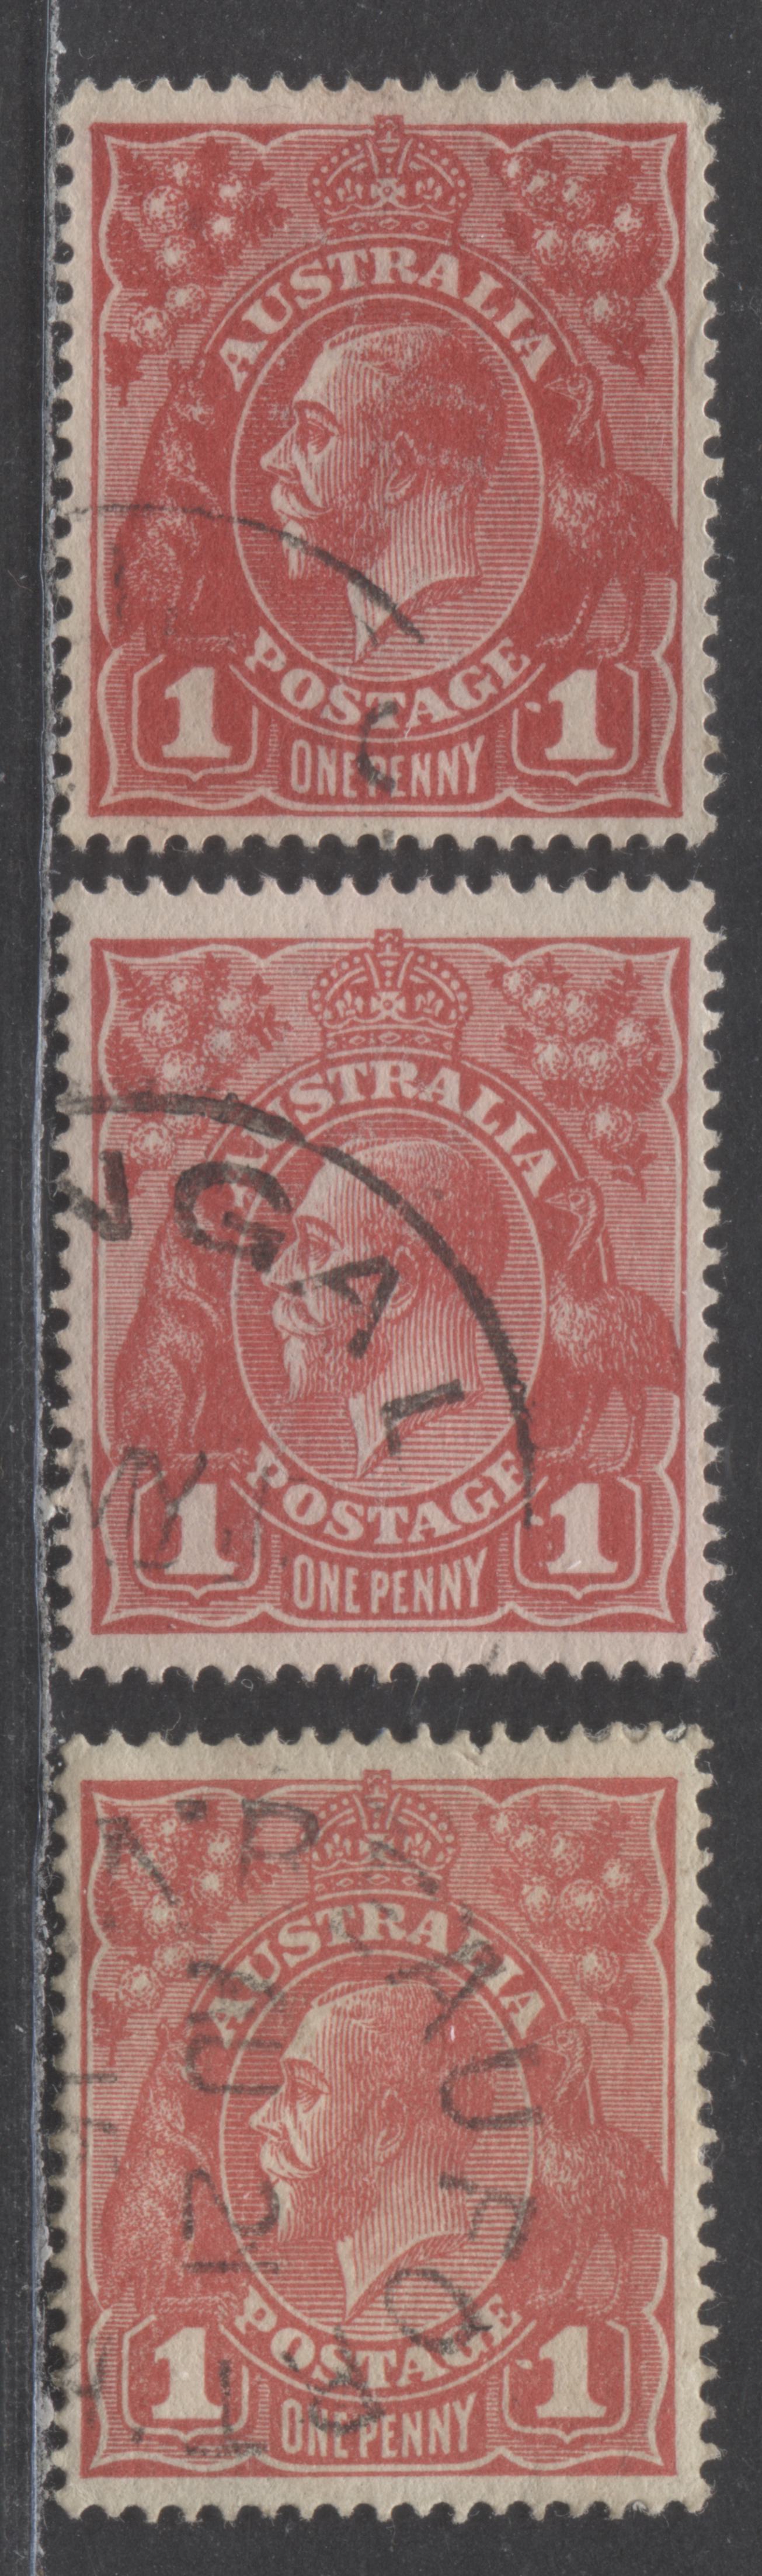 Lot 69 Australia SG#21cg 1d Rose Red, Pale Carmine Red & Carmine 1914-1920 Engraved KGV Profile Head Issue, With Dot Before Right 1, Single Crown Wmk, 3 Very Fine Used Singles, Click on Listing to See ALL Pictures, Estimated Value $35 USD